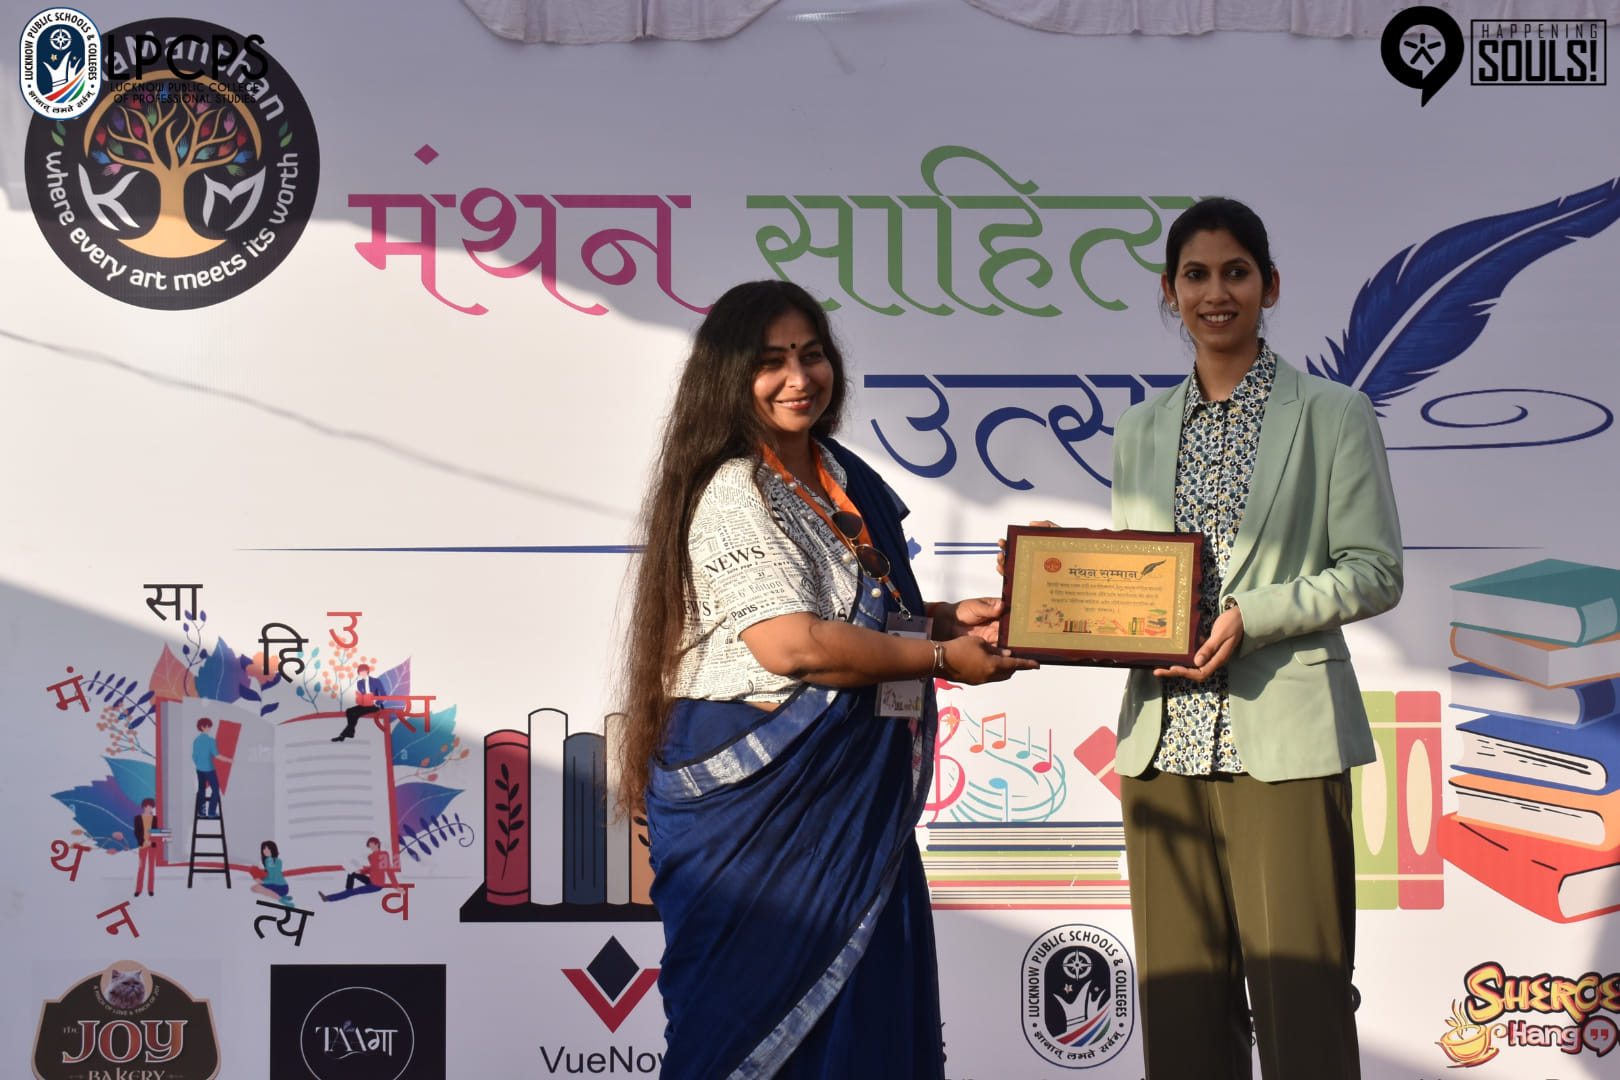 Ms. Garima Singh, Director of LPCPS, was honoured at the Manthan Foundation's 'Manthan Sahitya Utsav' held at Sheroes Hangout. She was felicitated for her efforts to promote the Hindi language and women's empowerment.